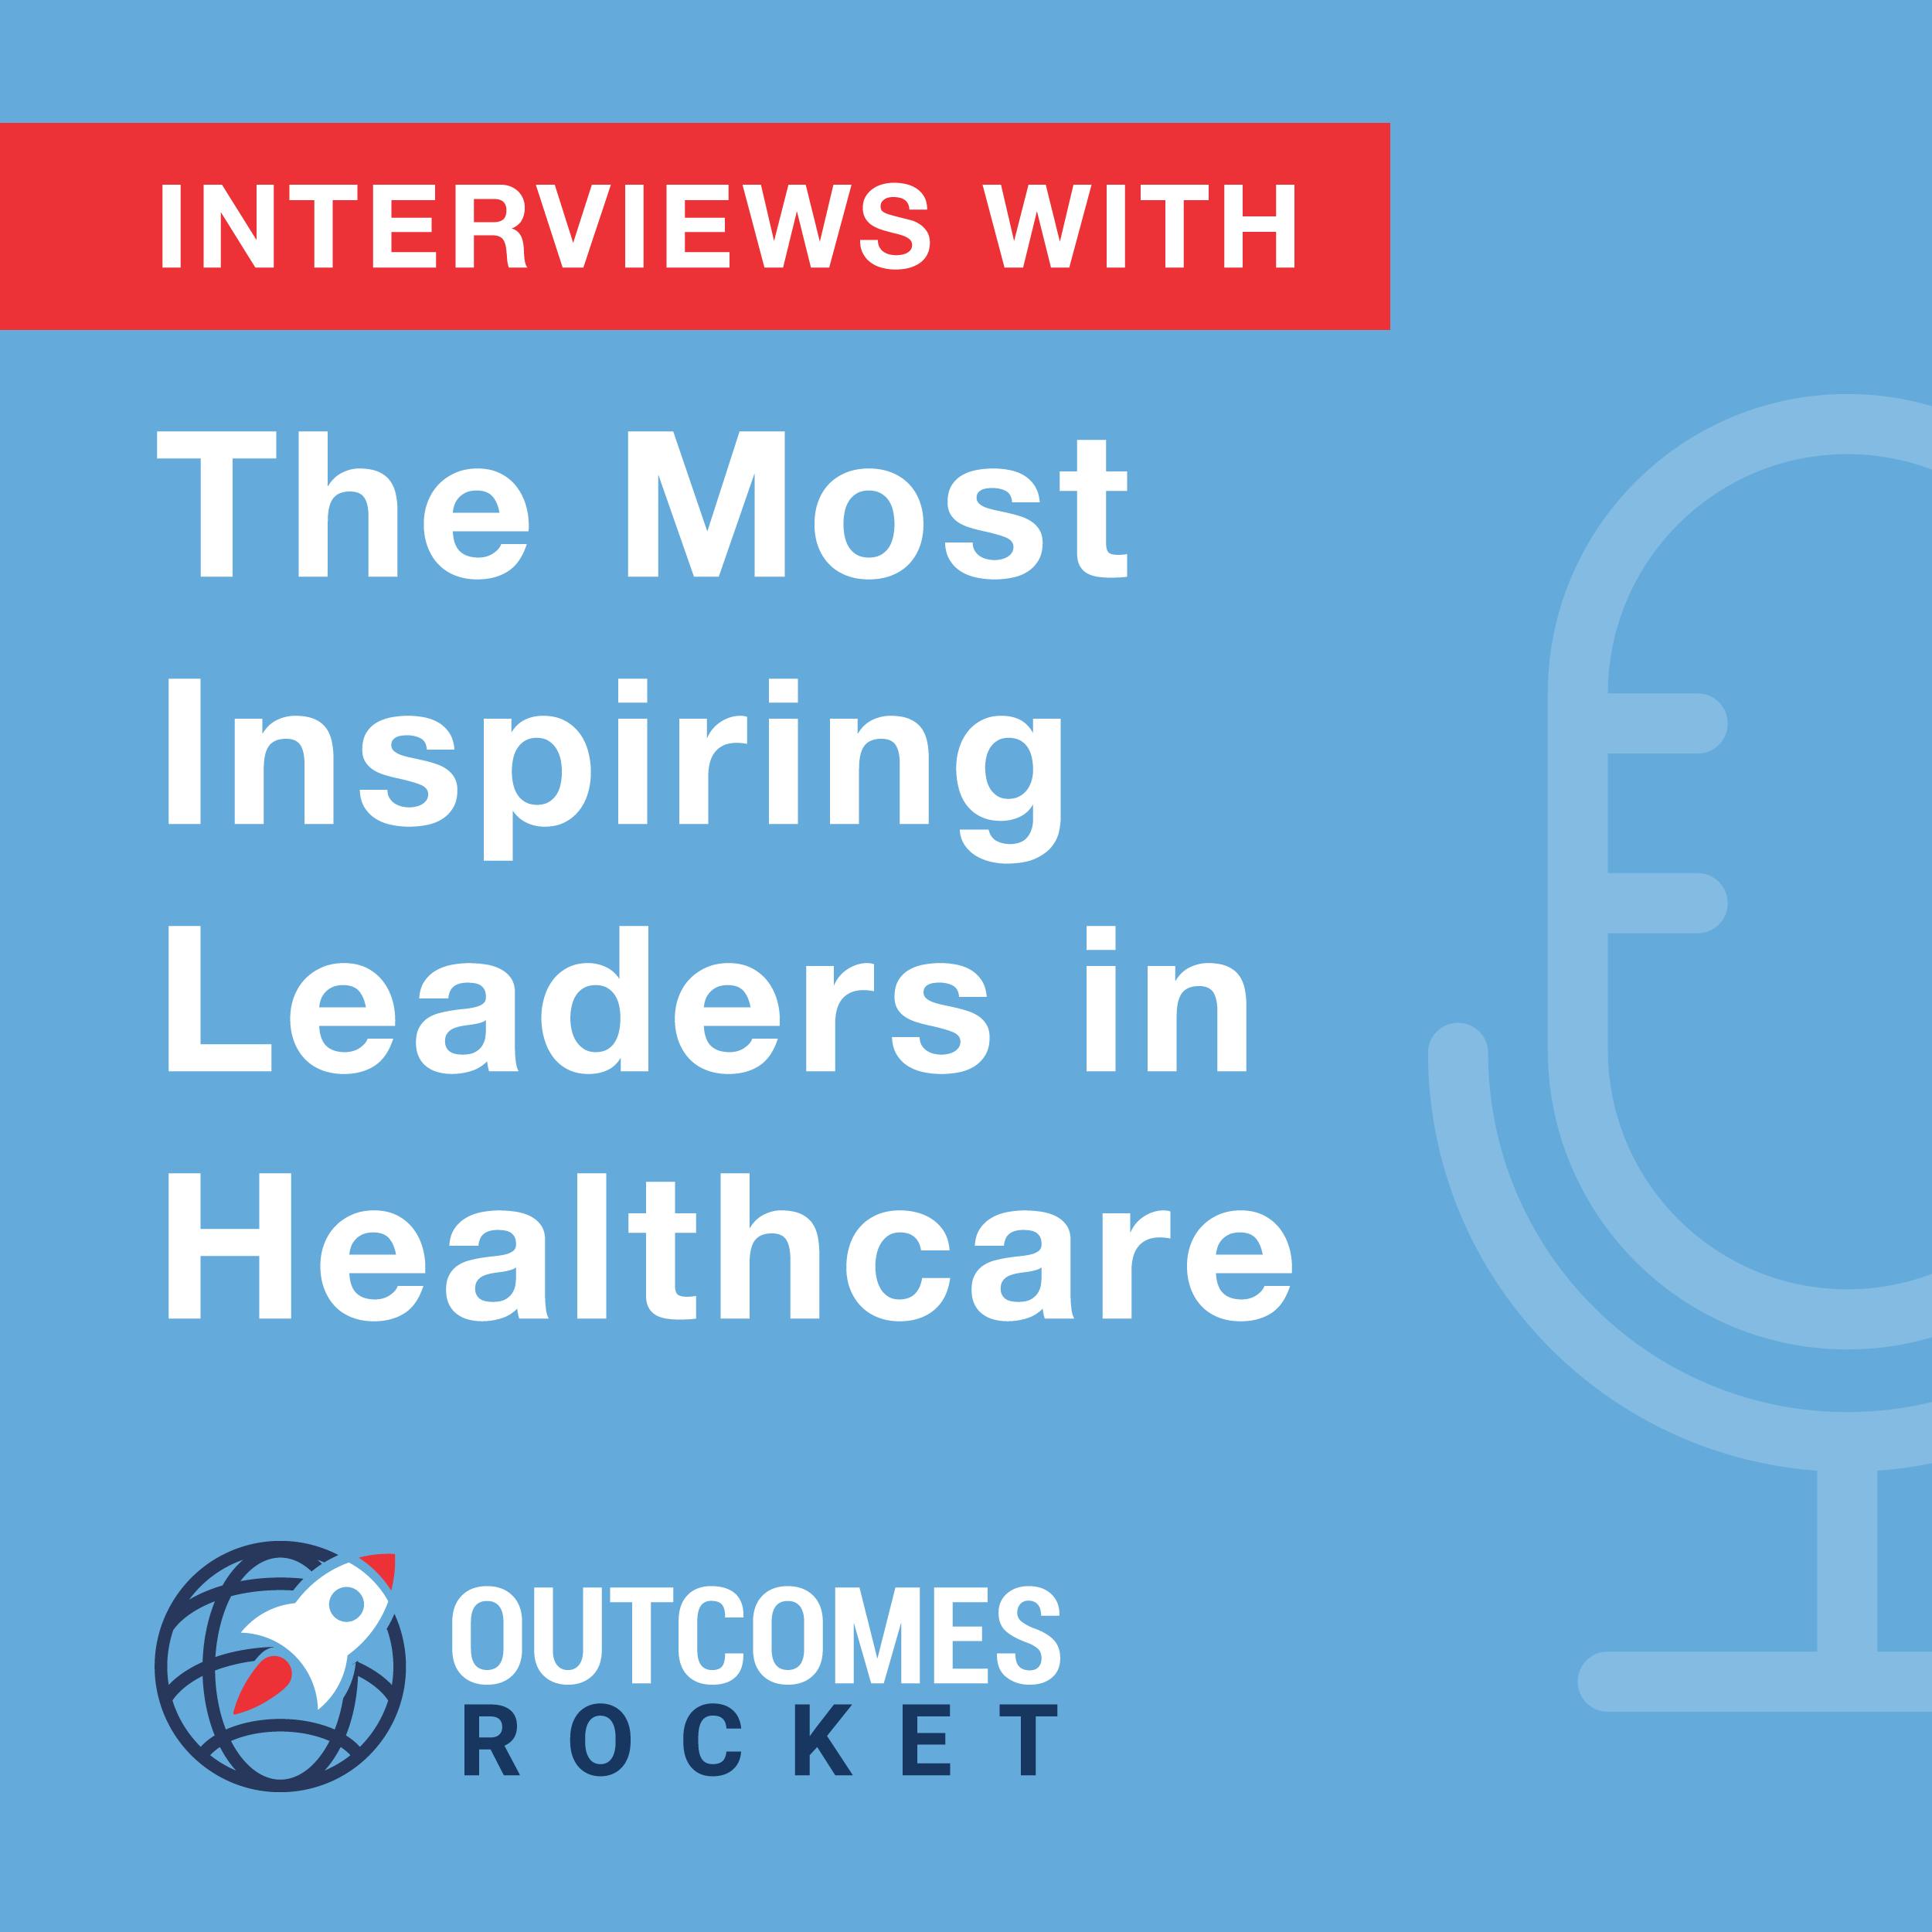 Innovative Thoughts in Healthcare Consumerism with Ken Robbins, CEO at Response Mine Health